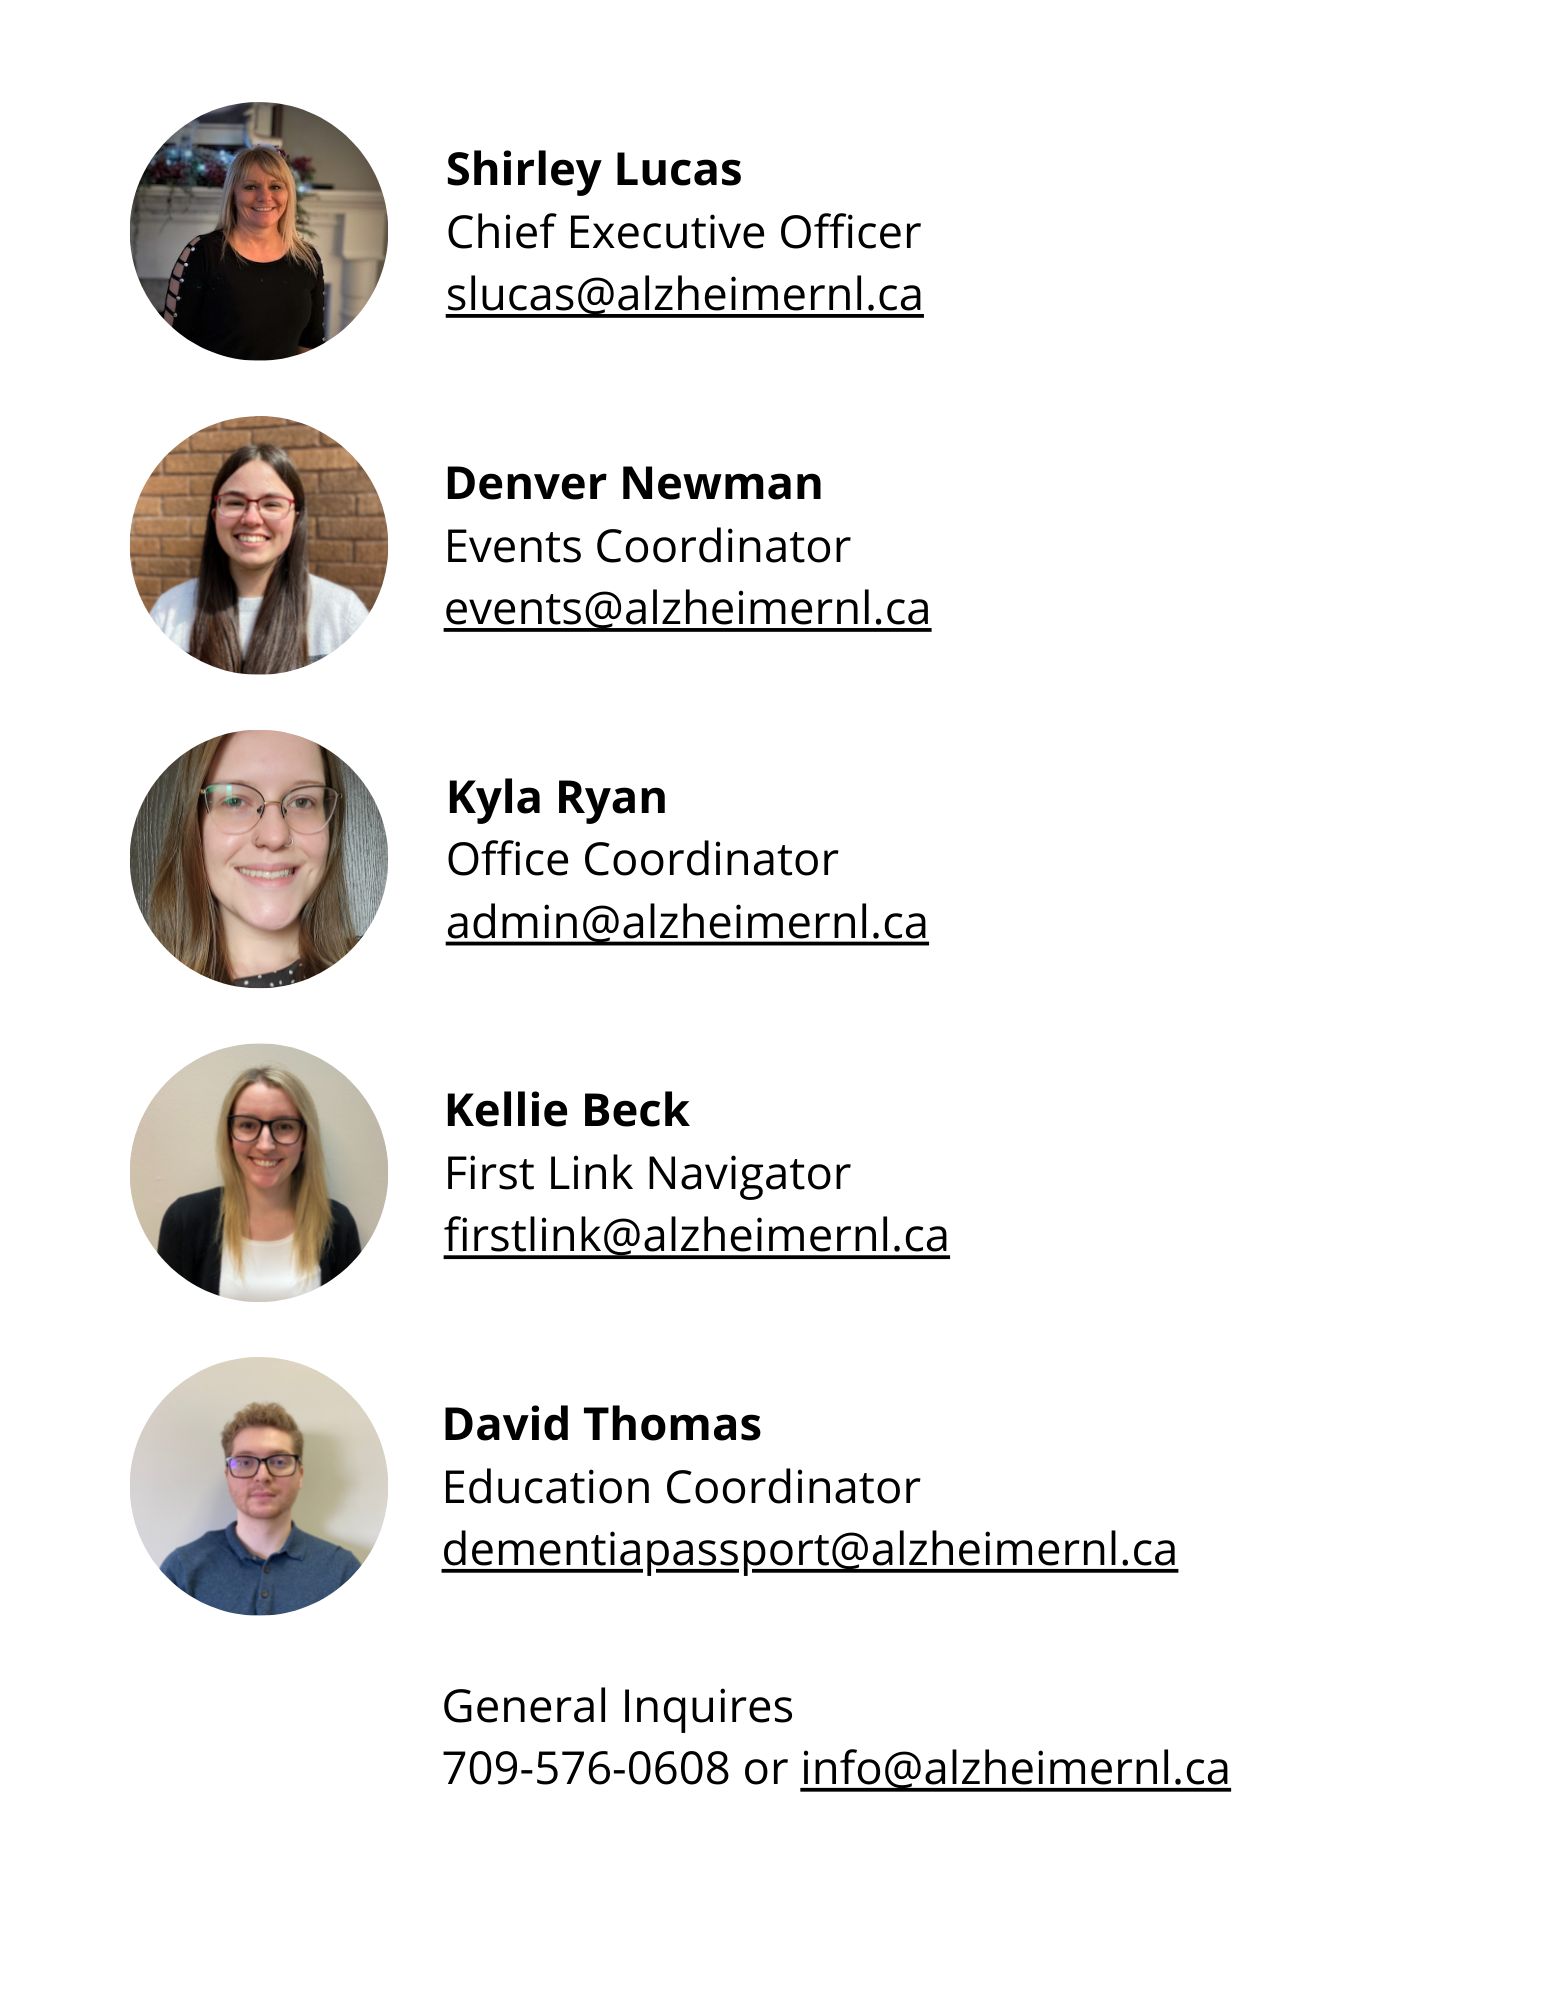 Staff Pictures - website updated July 2021.png